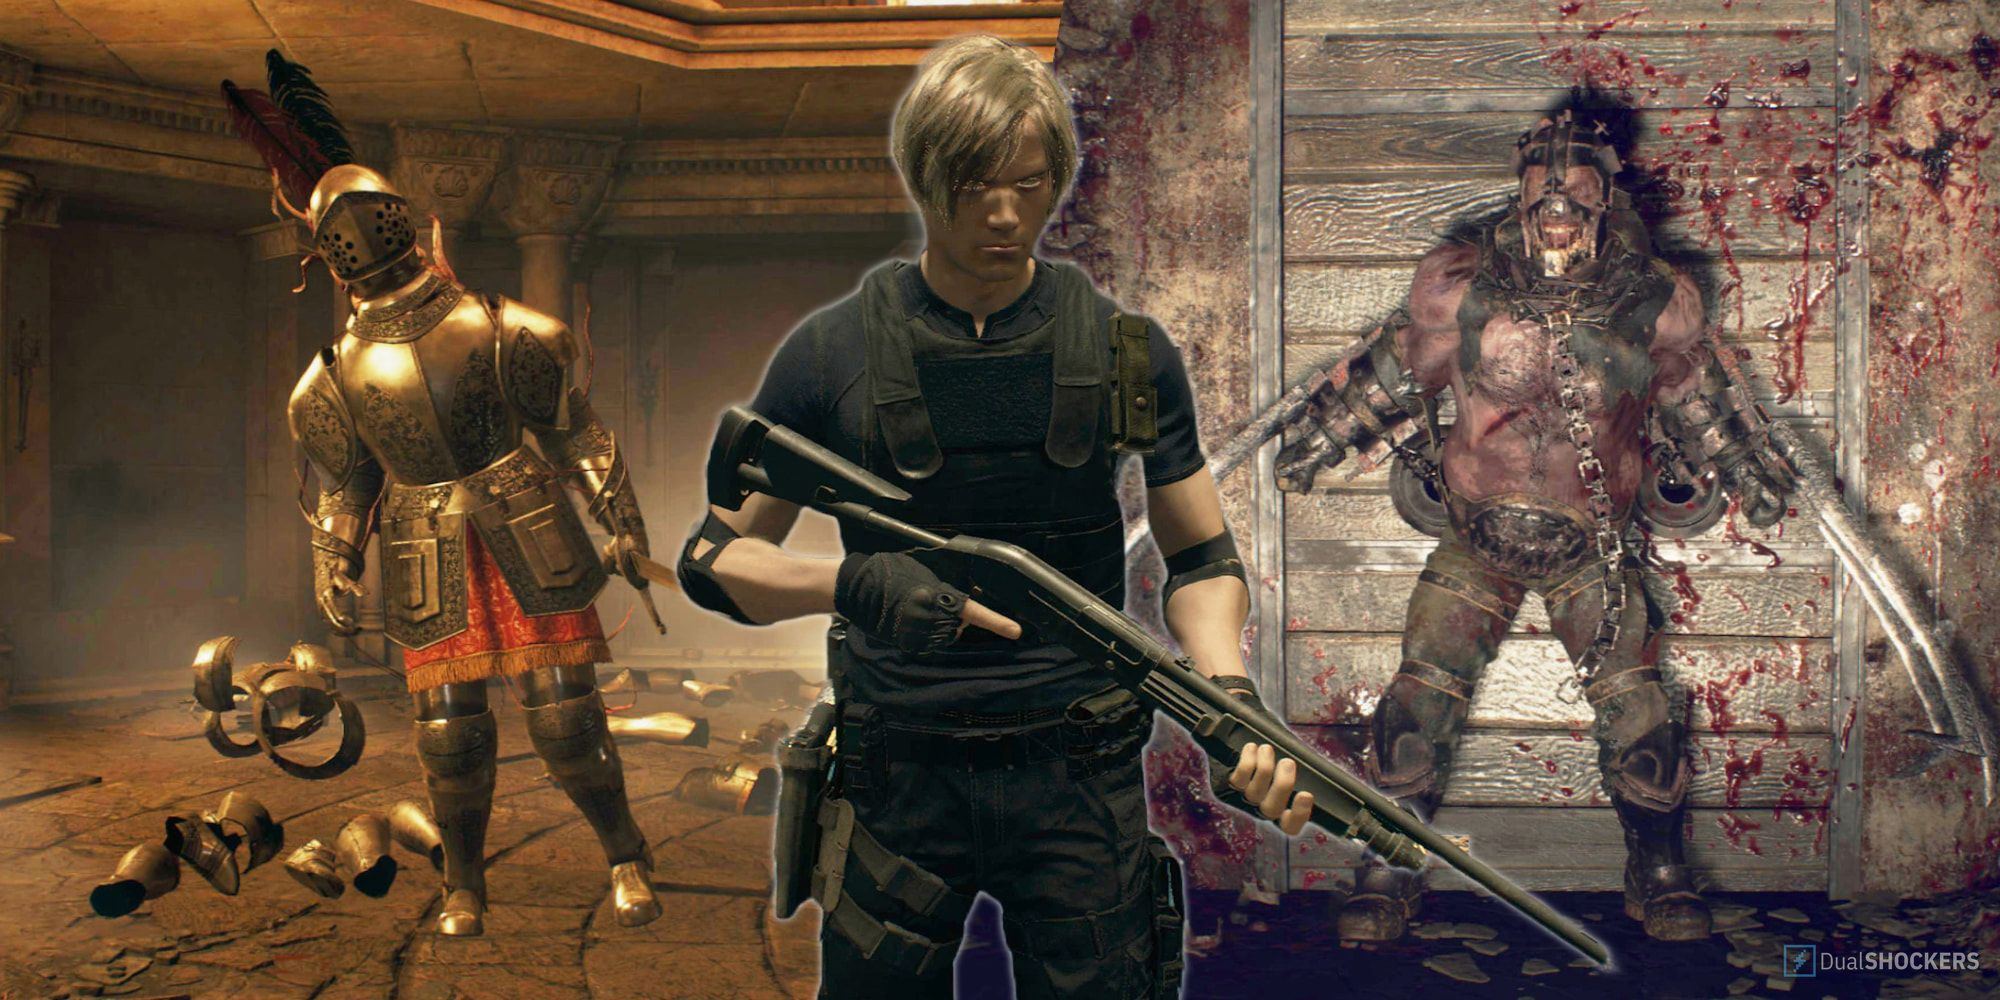 How to Defeat the Merciless Knight in Resident Evil 4 Remake